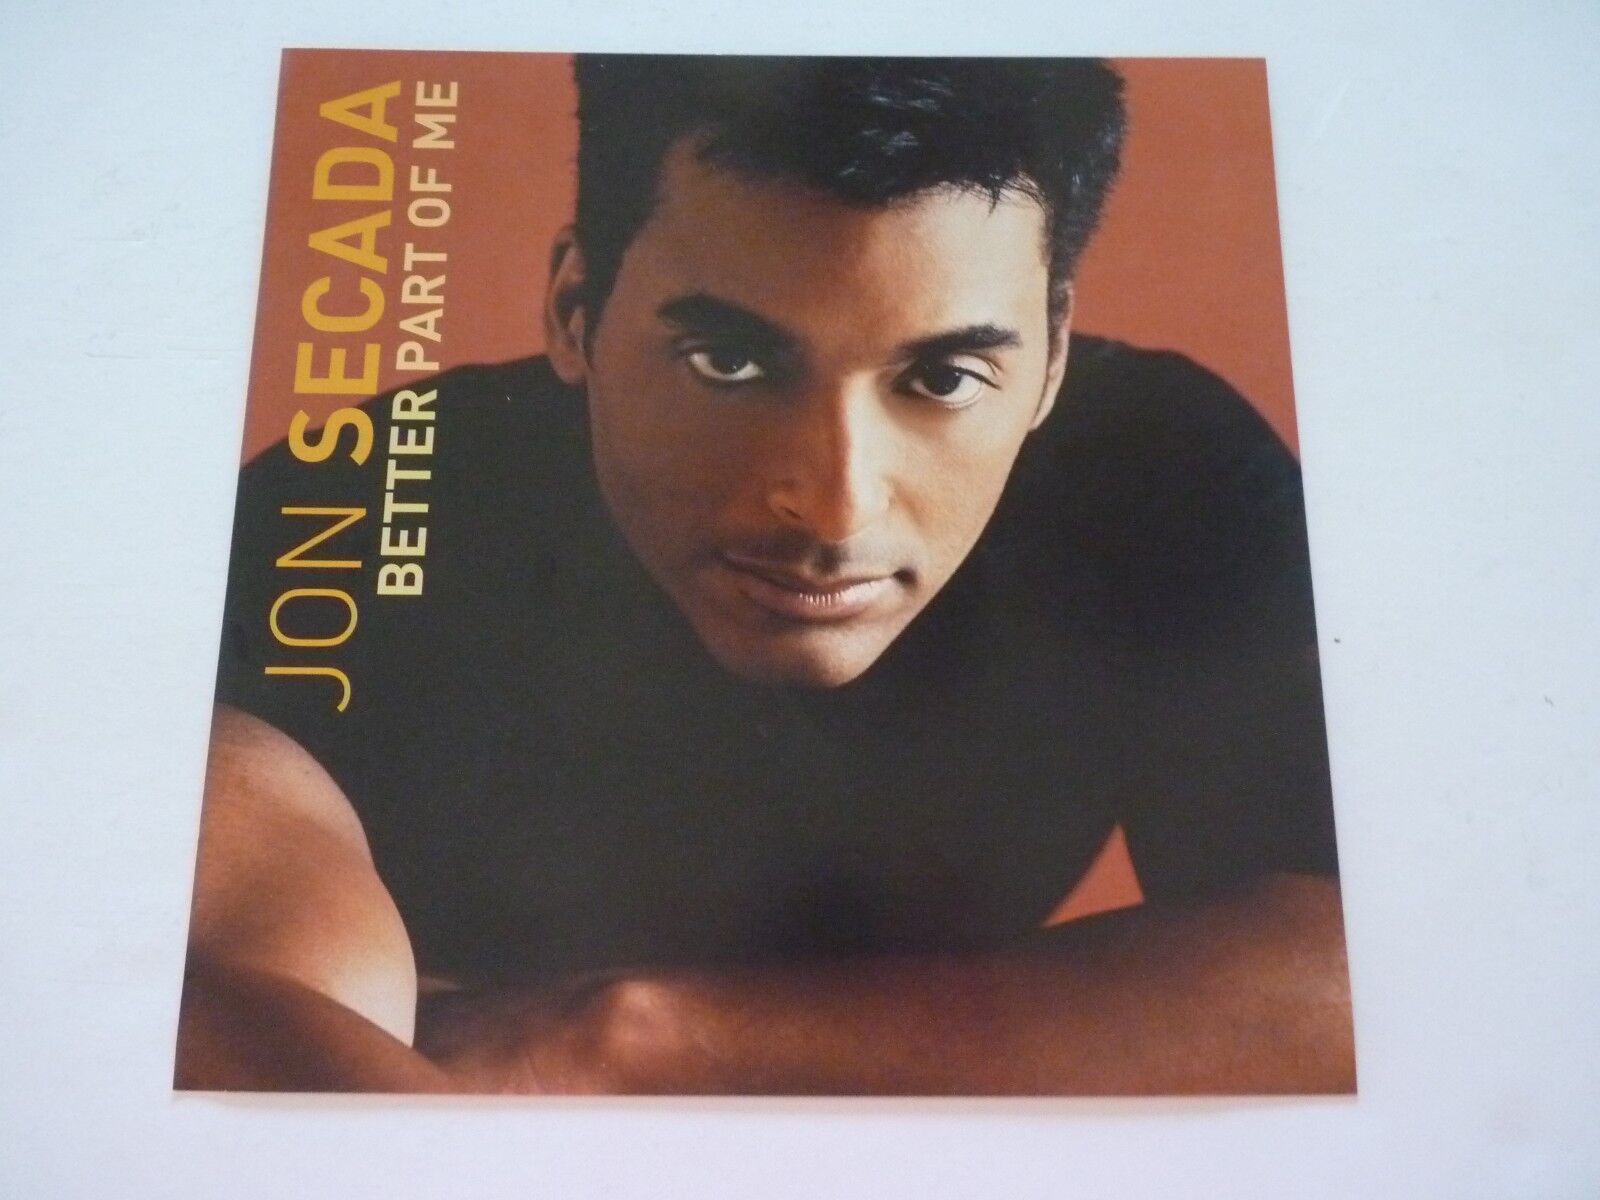 Jon Secada Better Part of Me LP Record Photo Poster painting Flat 12x12 Poster